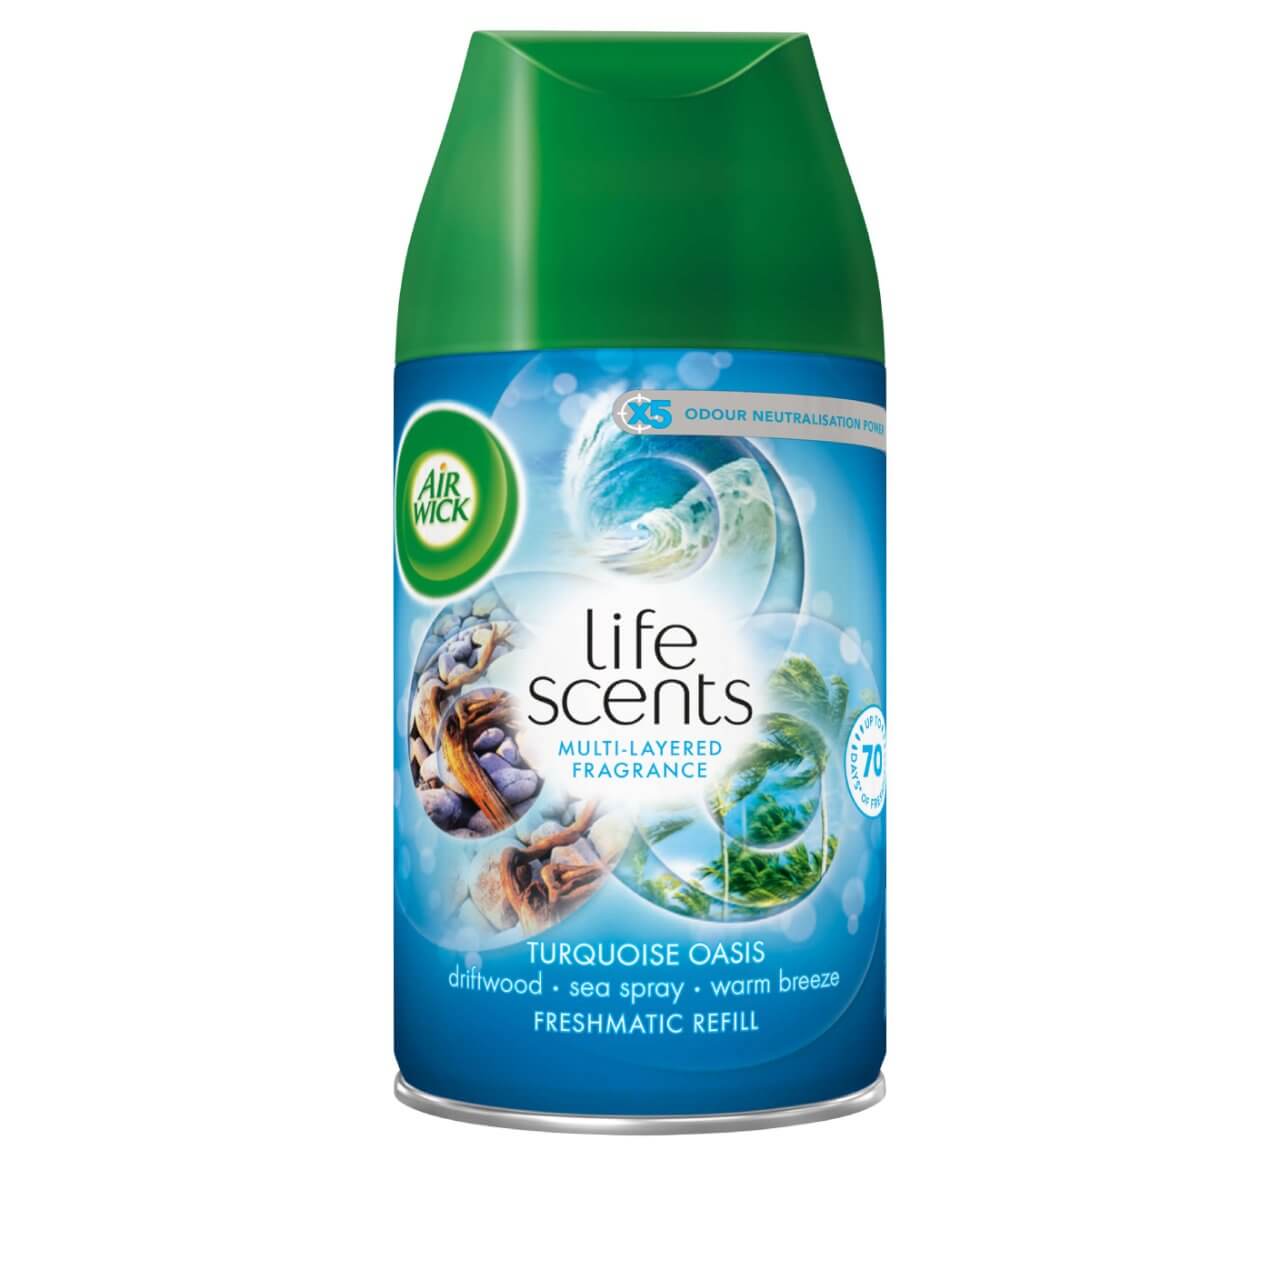 Air Wick Freshmatic Refill Life Scents Turquoise Oasis 250 ml